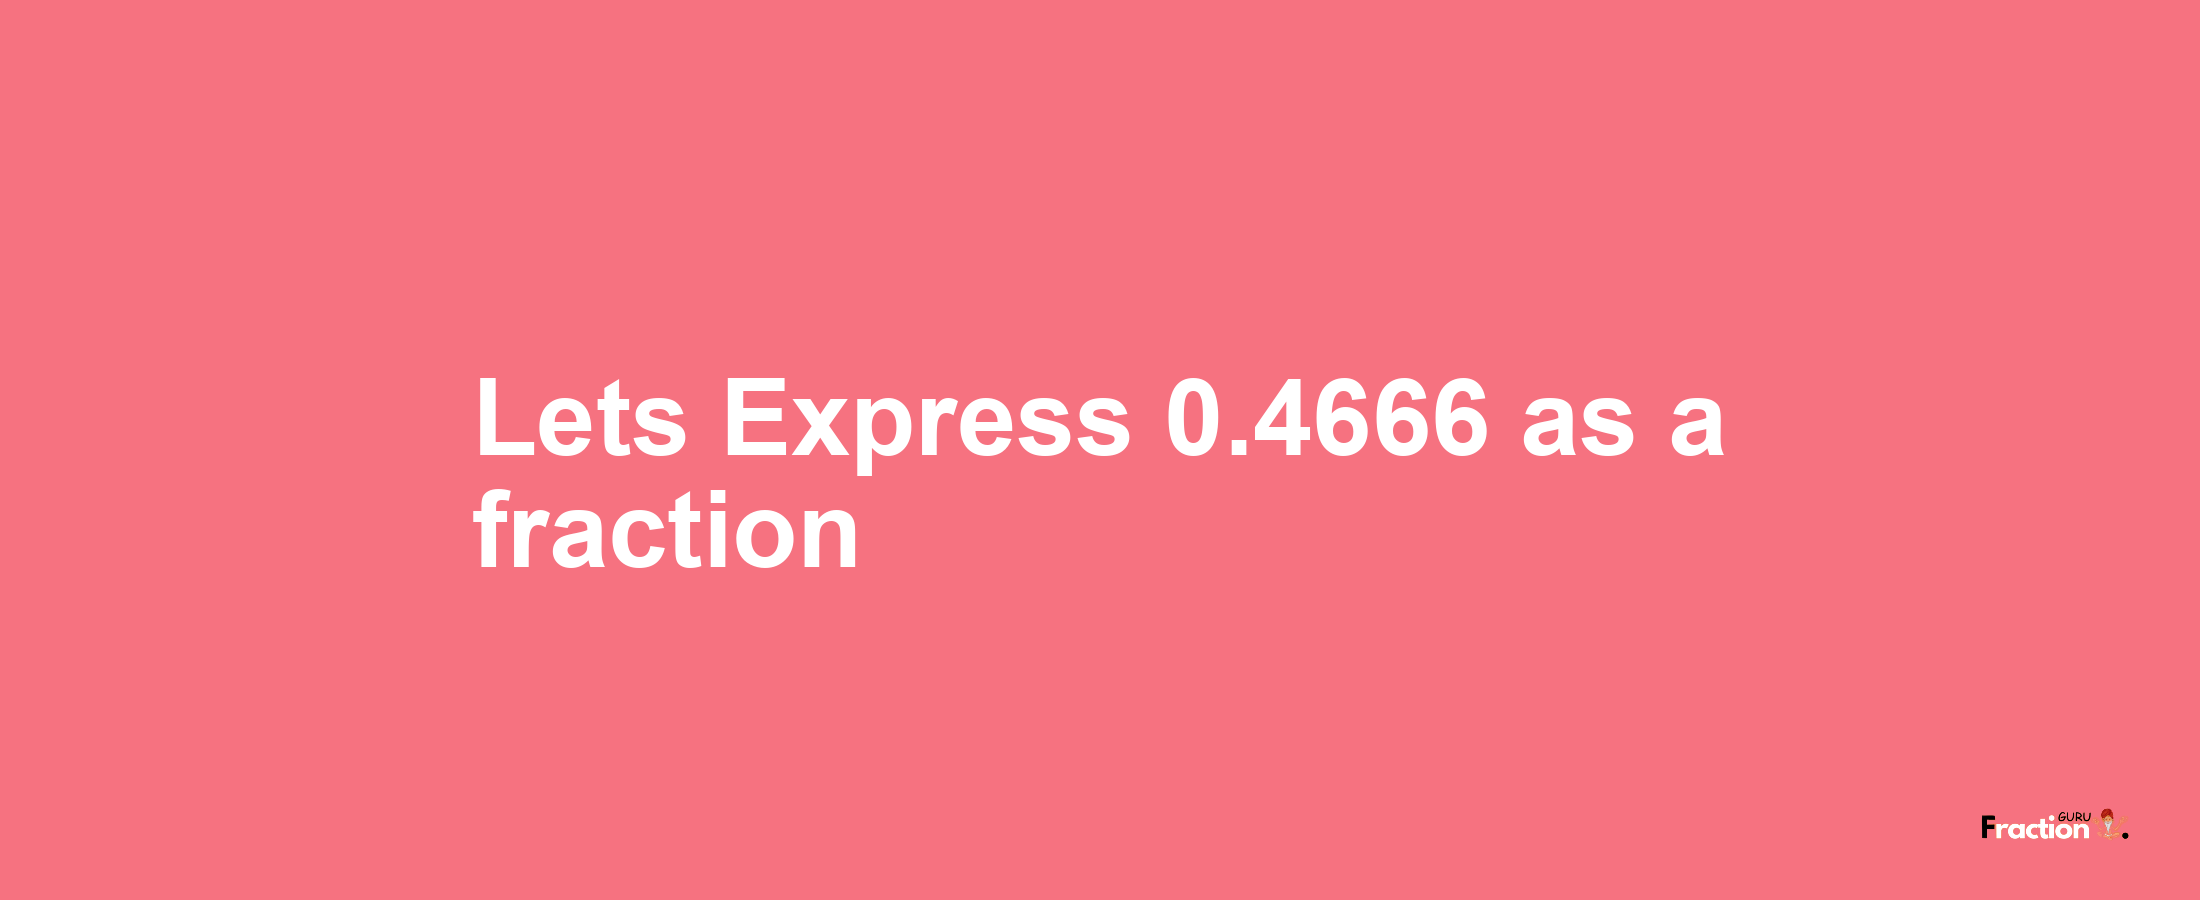 Lets Express 0.4666 as afraction